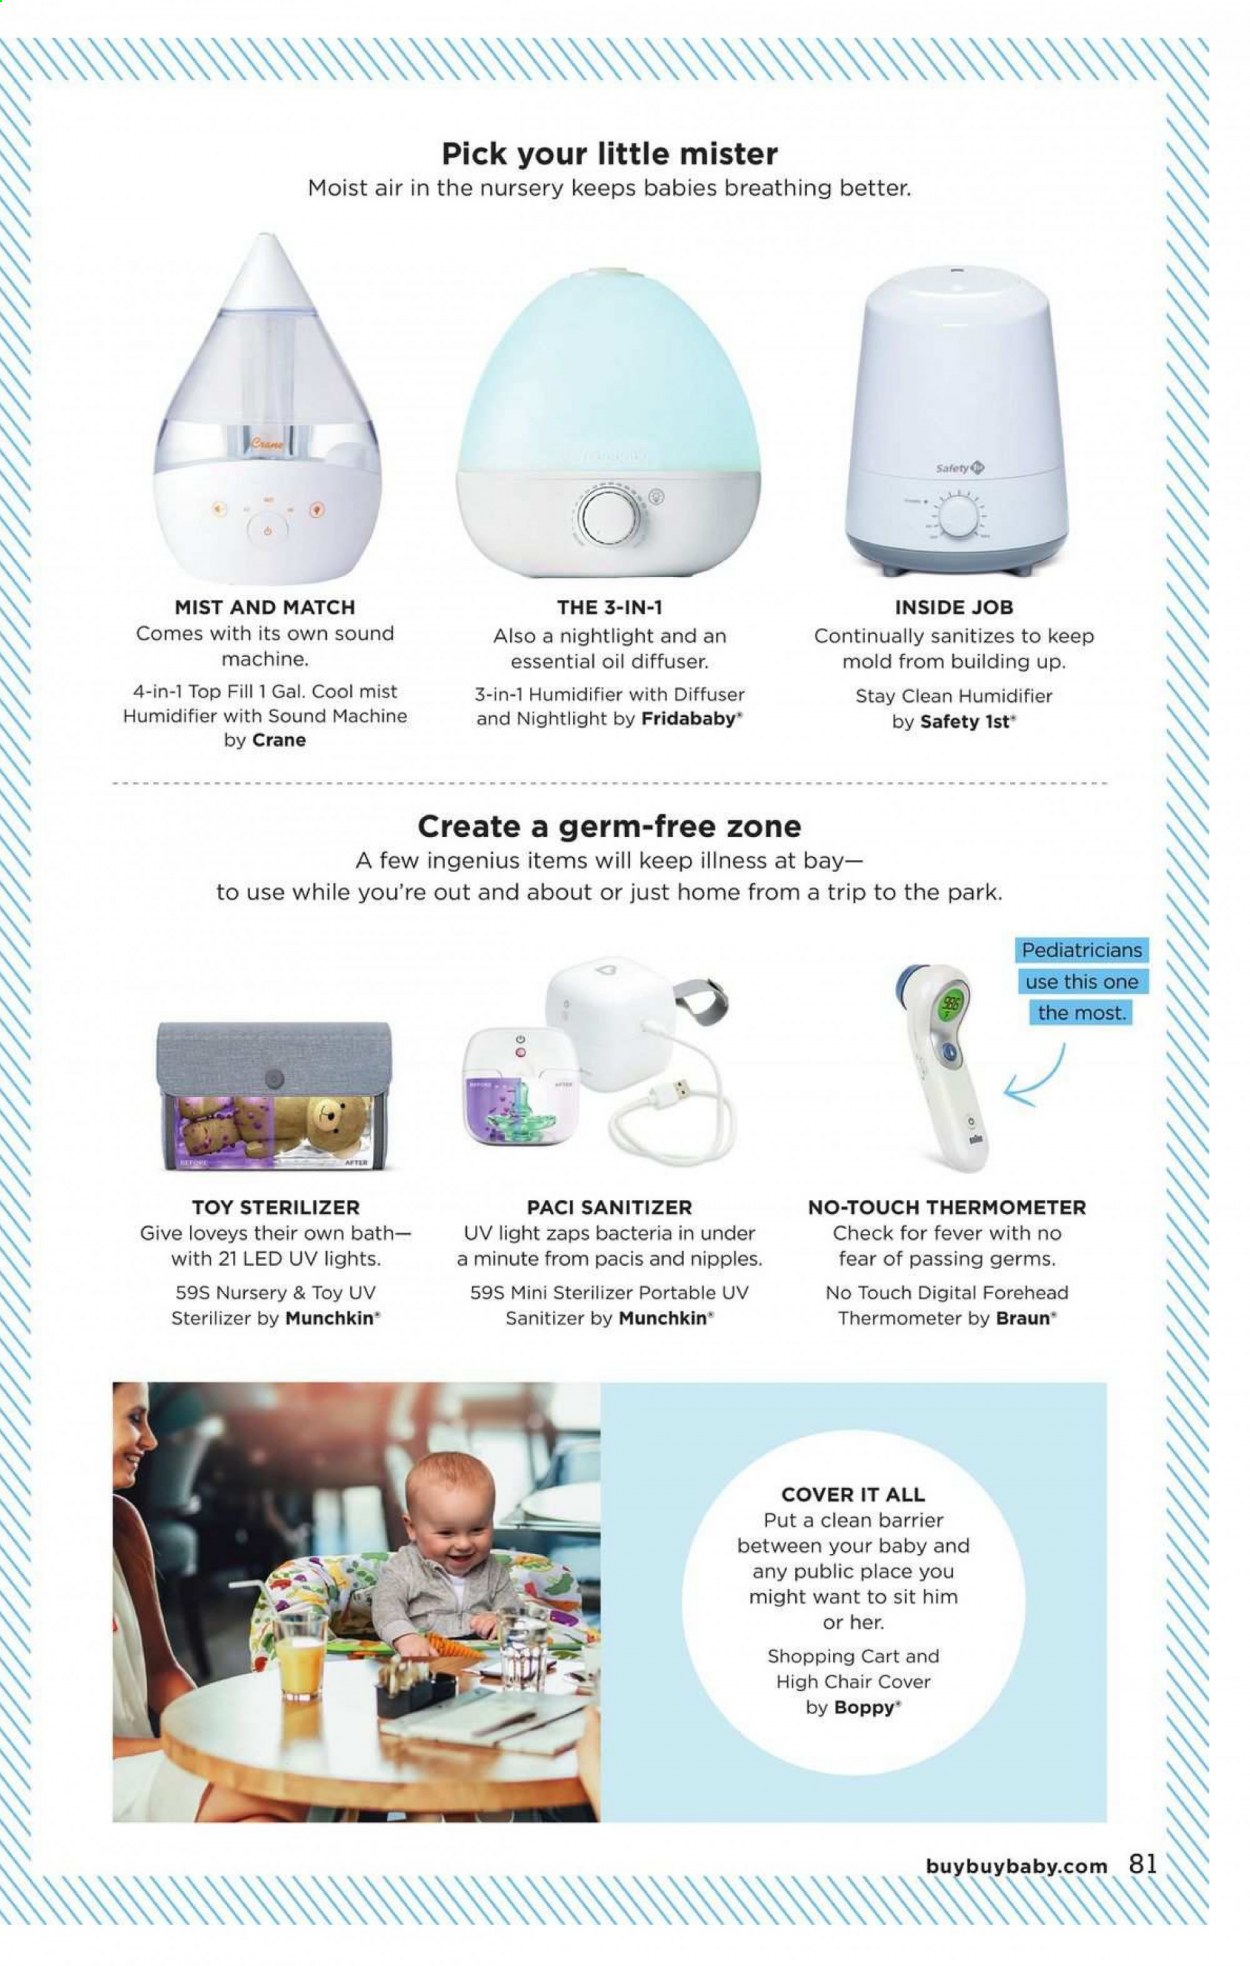 thumbnail - buybuy BABY Flyer - 05/05/2021 - 12/31/2022 - Sales products - No Fear, toys, thermometer, safety 1st. Page 82.